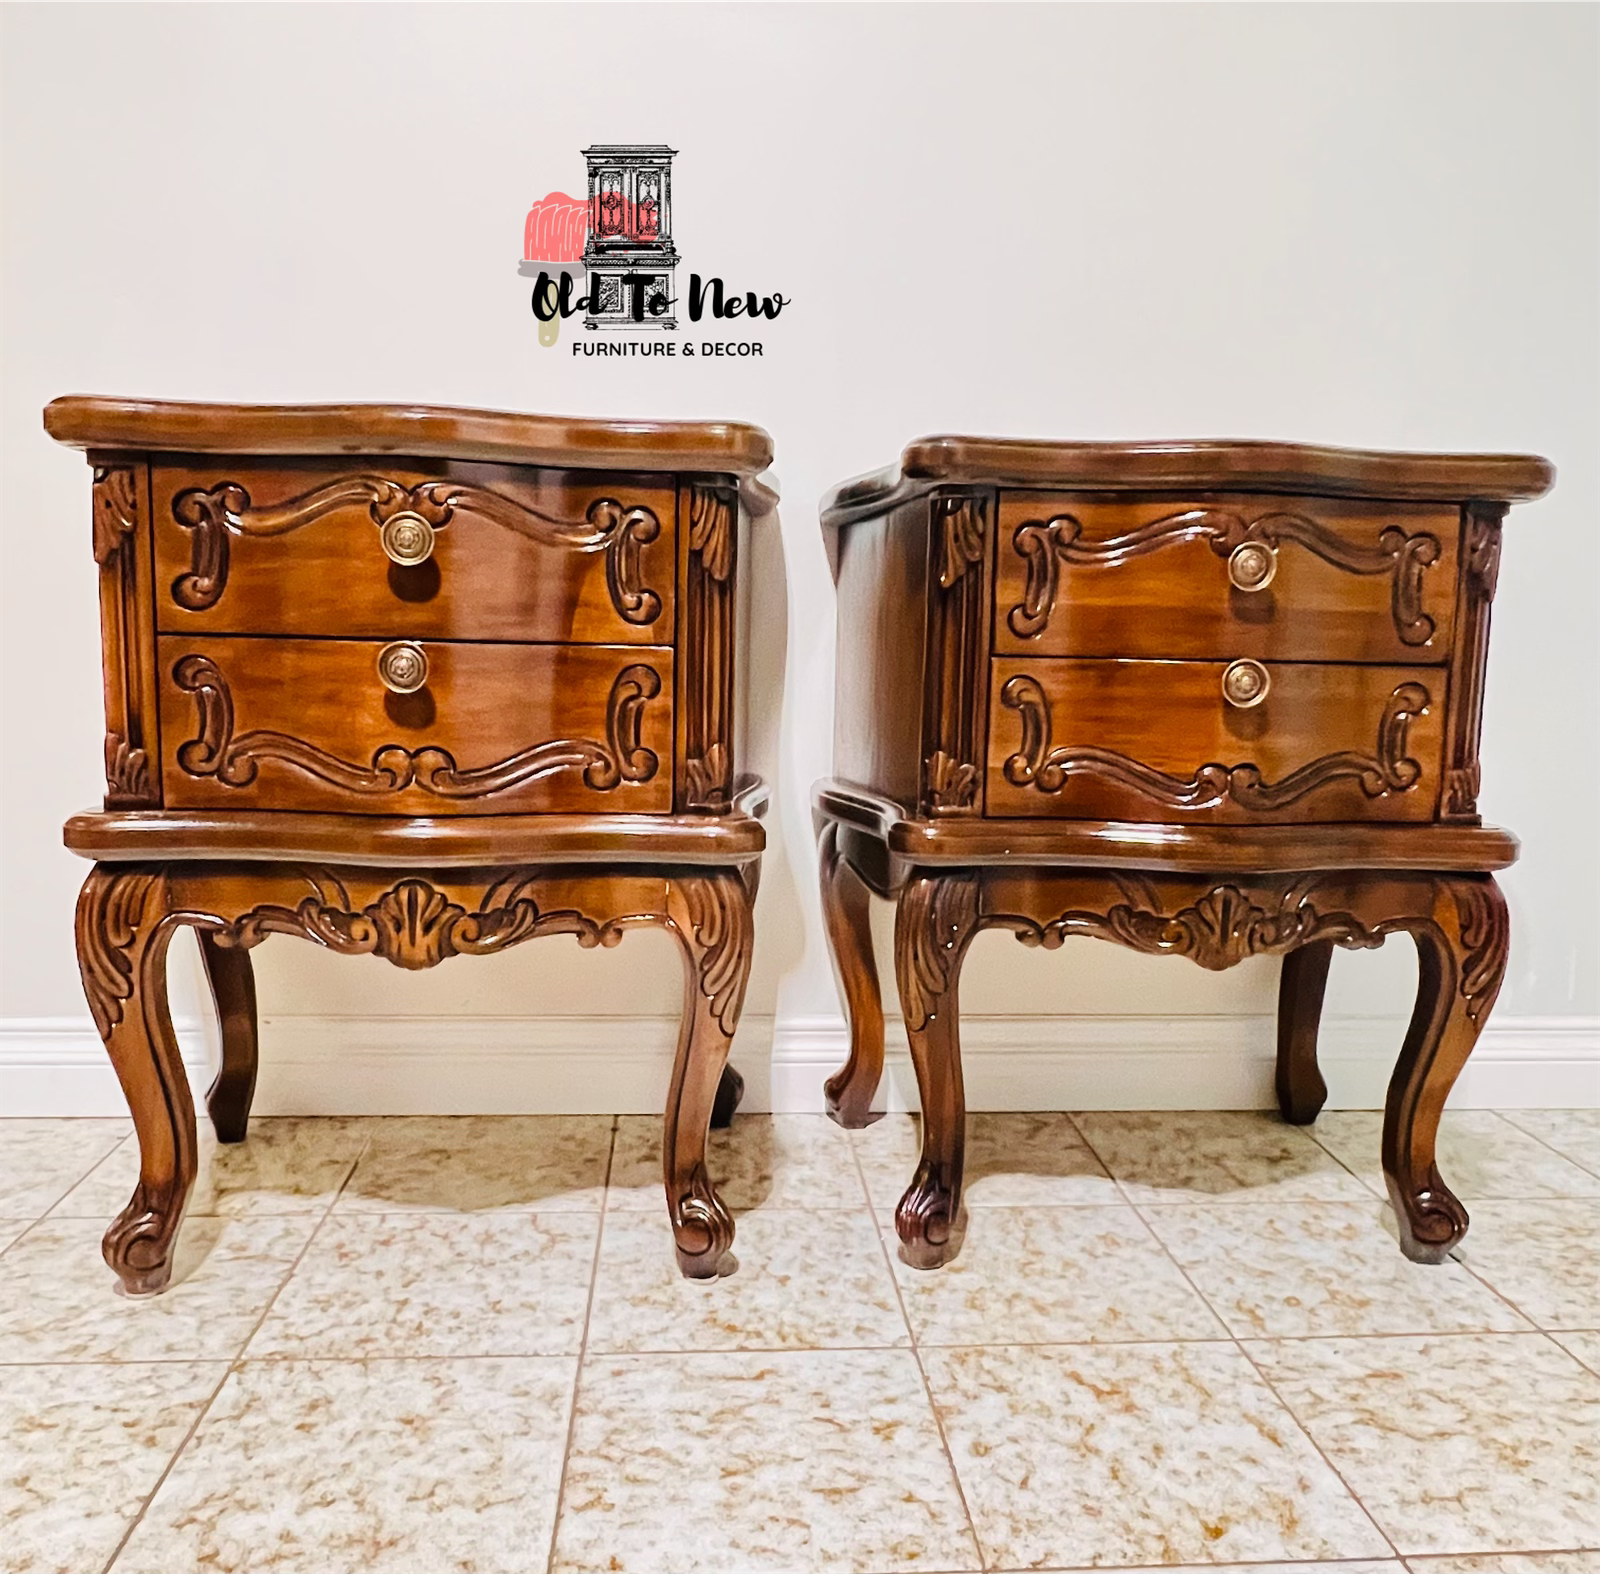 Ornate Wood End Tables , Old to New Furniture & Decor